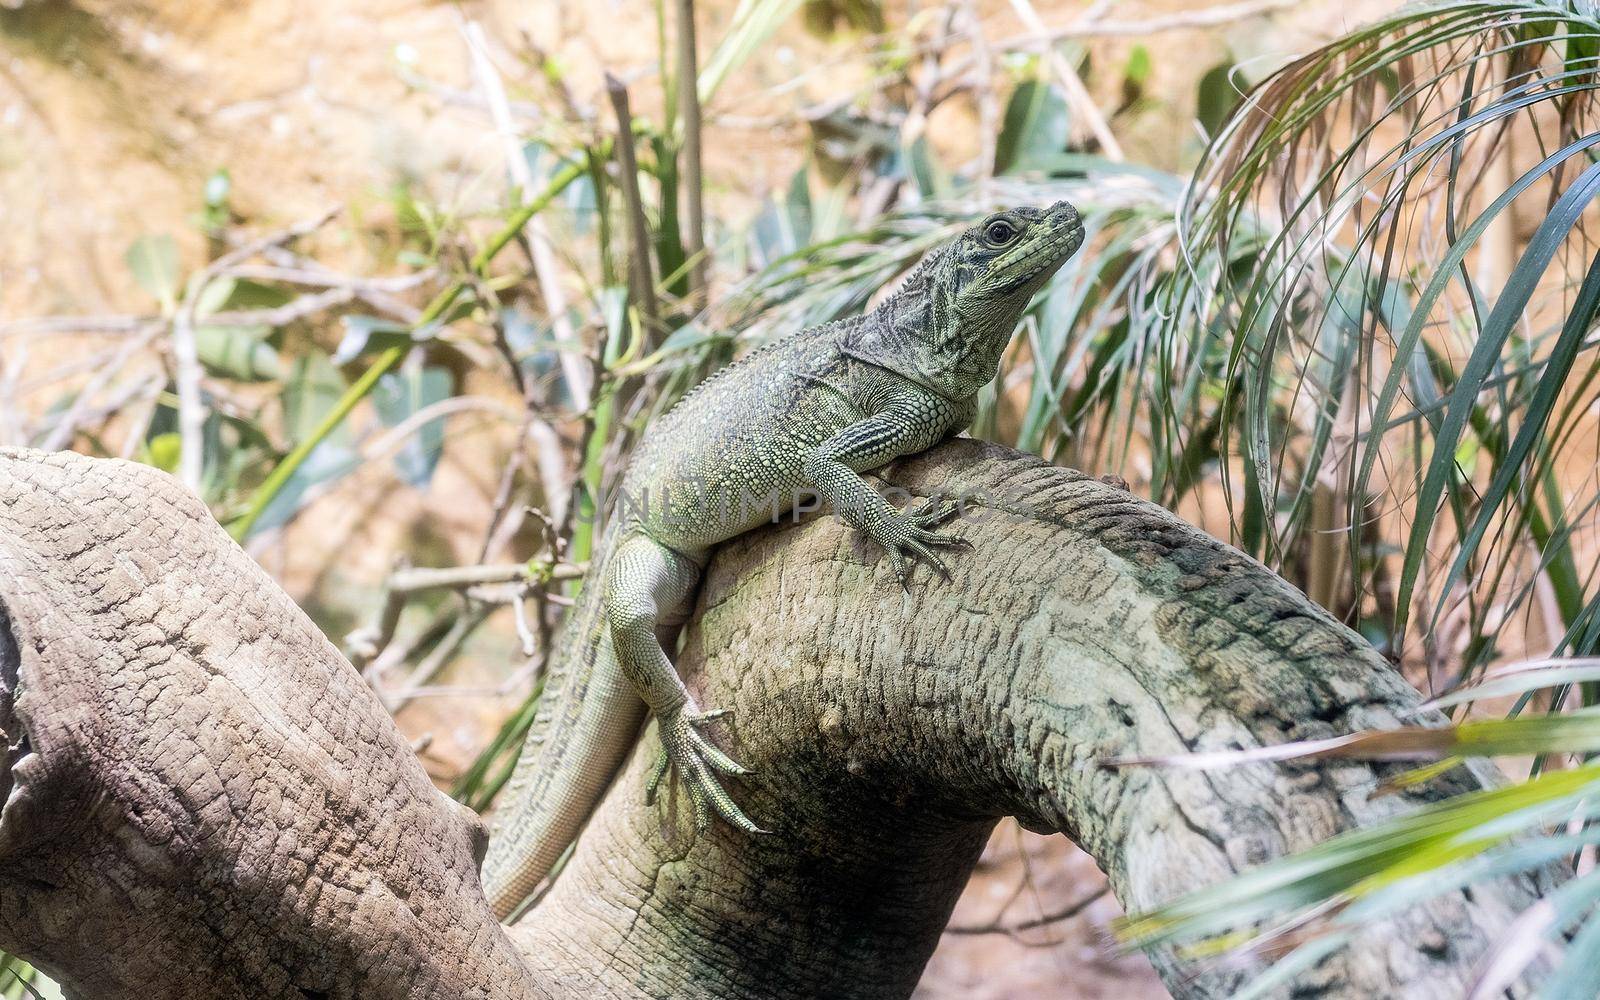 Common green iguana resting on a tree trunk in tropical environment at the zoo